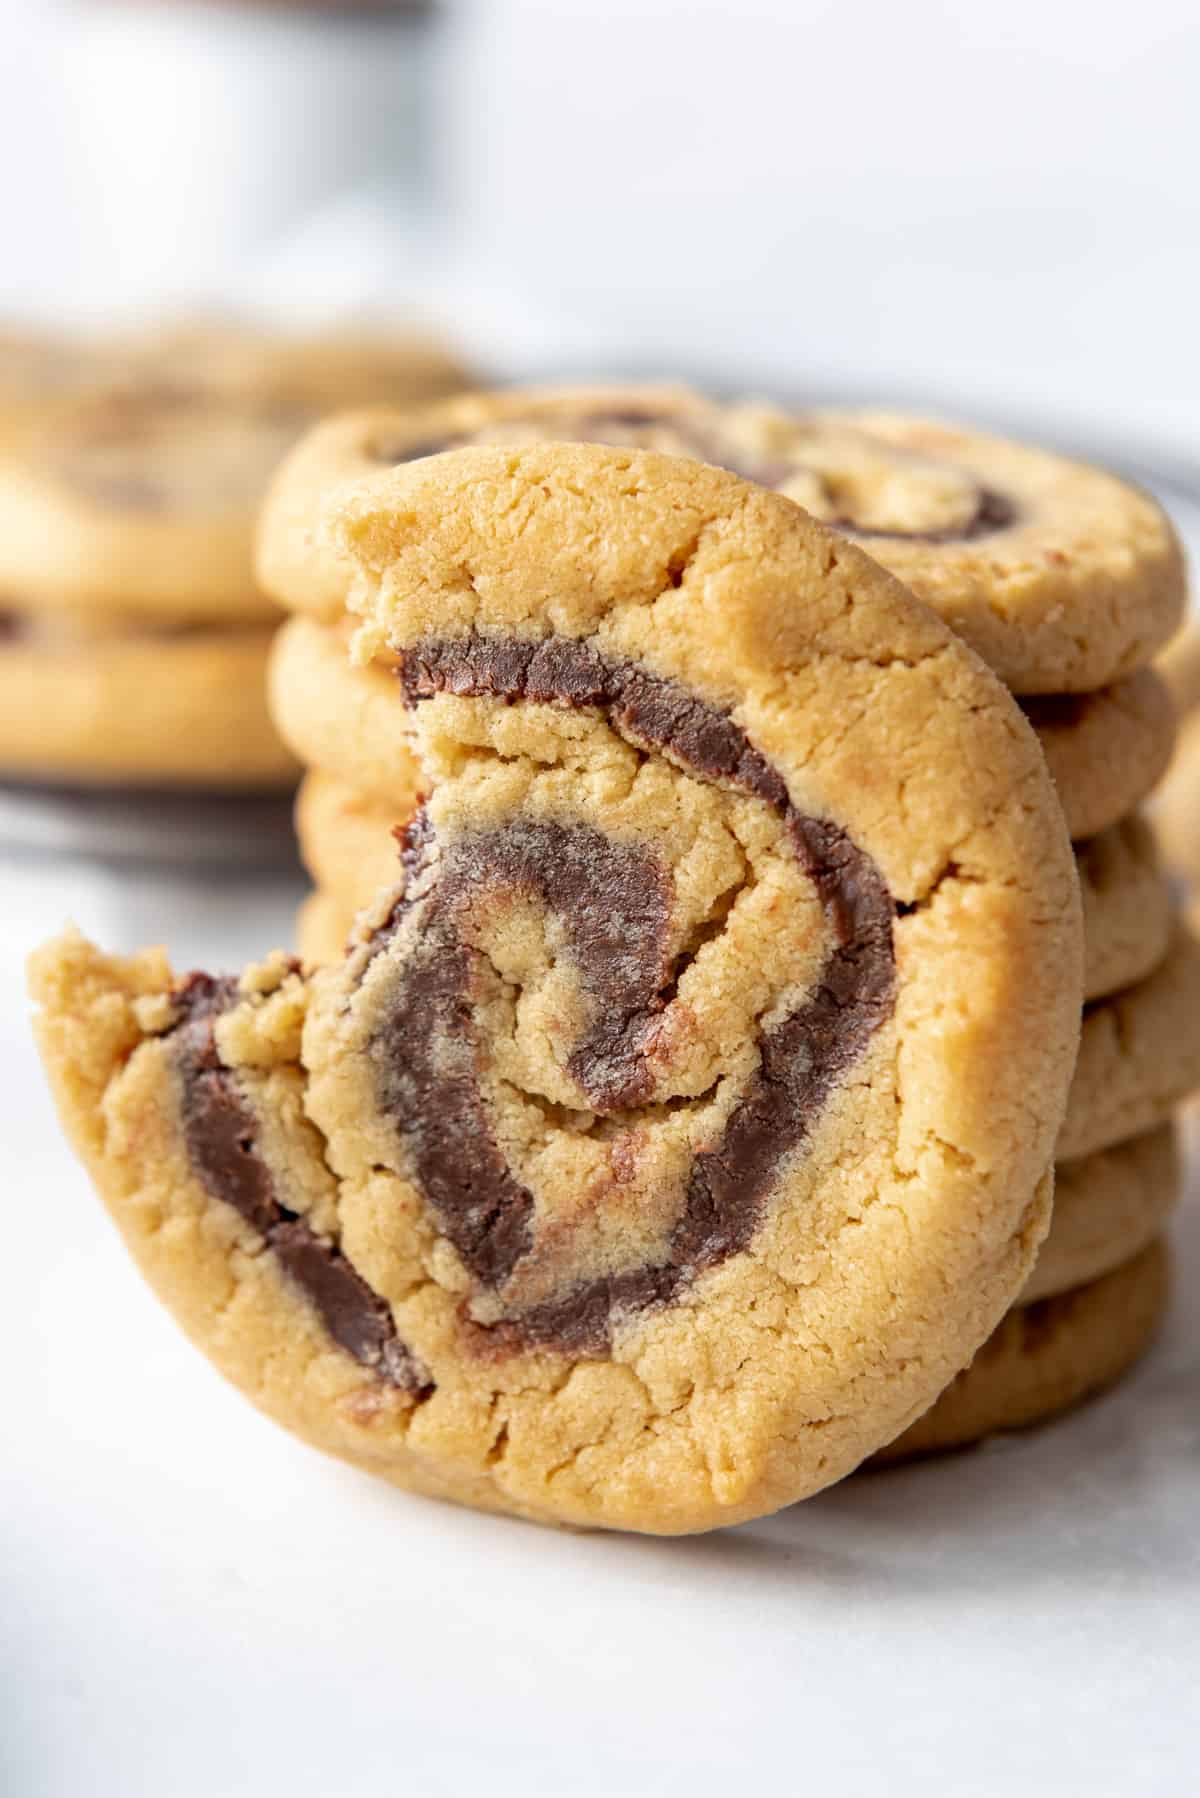 A peanut butter chocolate whirligig pinwheel cookie with a bite taken out of it leaning against a stack of cookies.